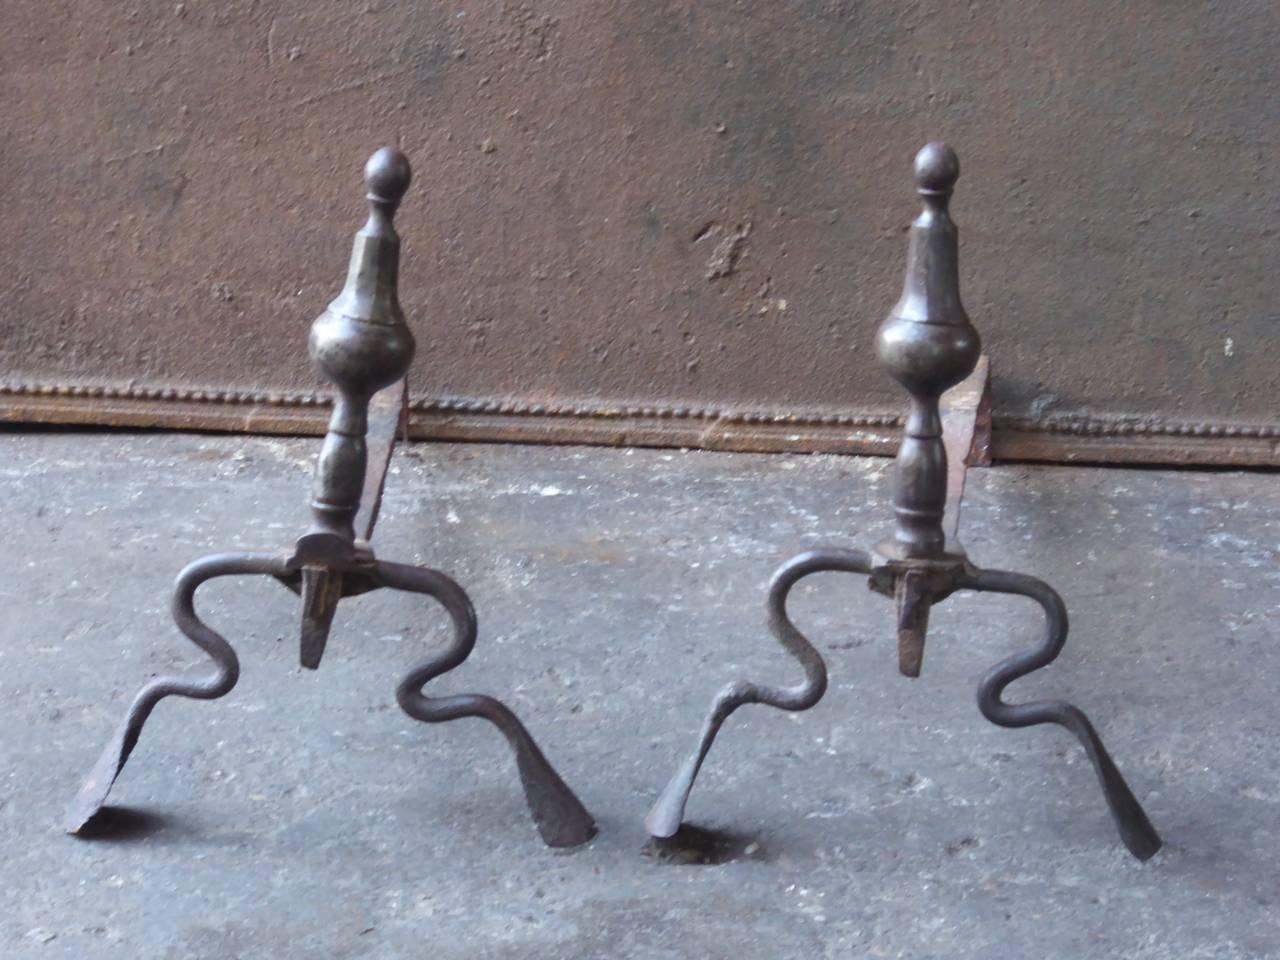 18th century French Louis XIV style firedogs made of wrought iron.

We have a unique and specialized collection of antique and used fireplace accessories consisting of more than 1000 listings at 1stdibs. Amongst others, we always have 500+